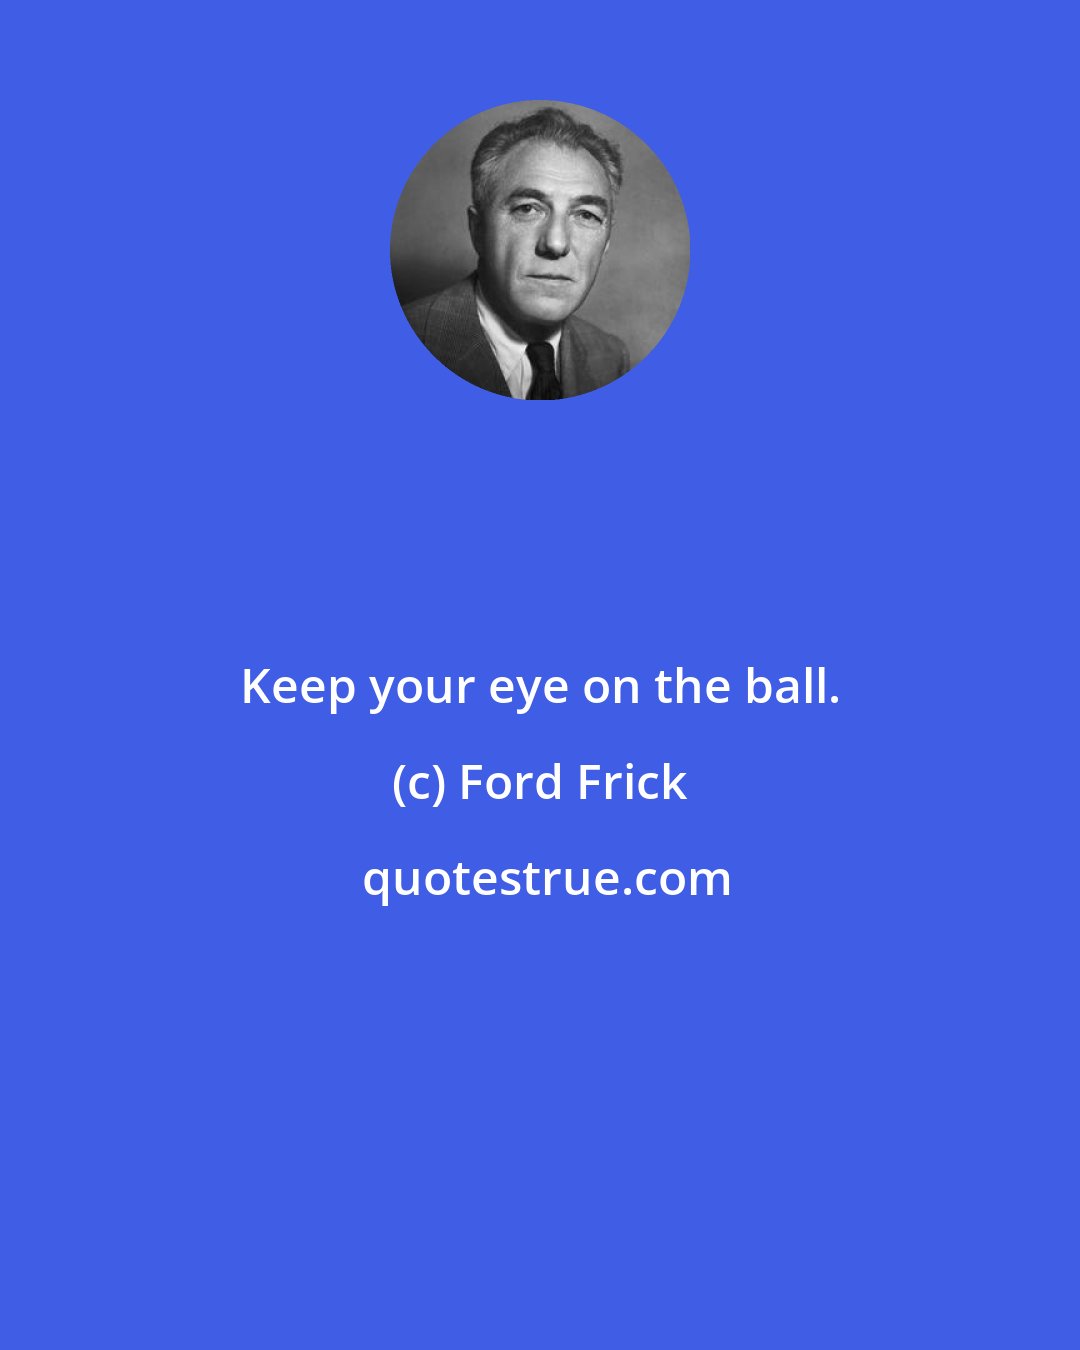 Ford Frick: Keep your eye on the ball.